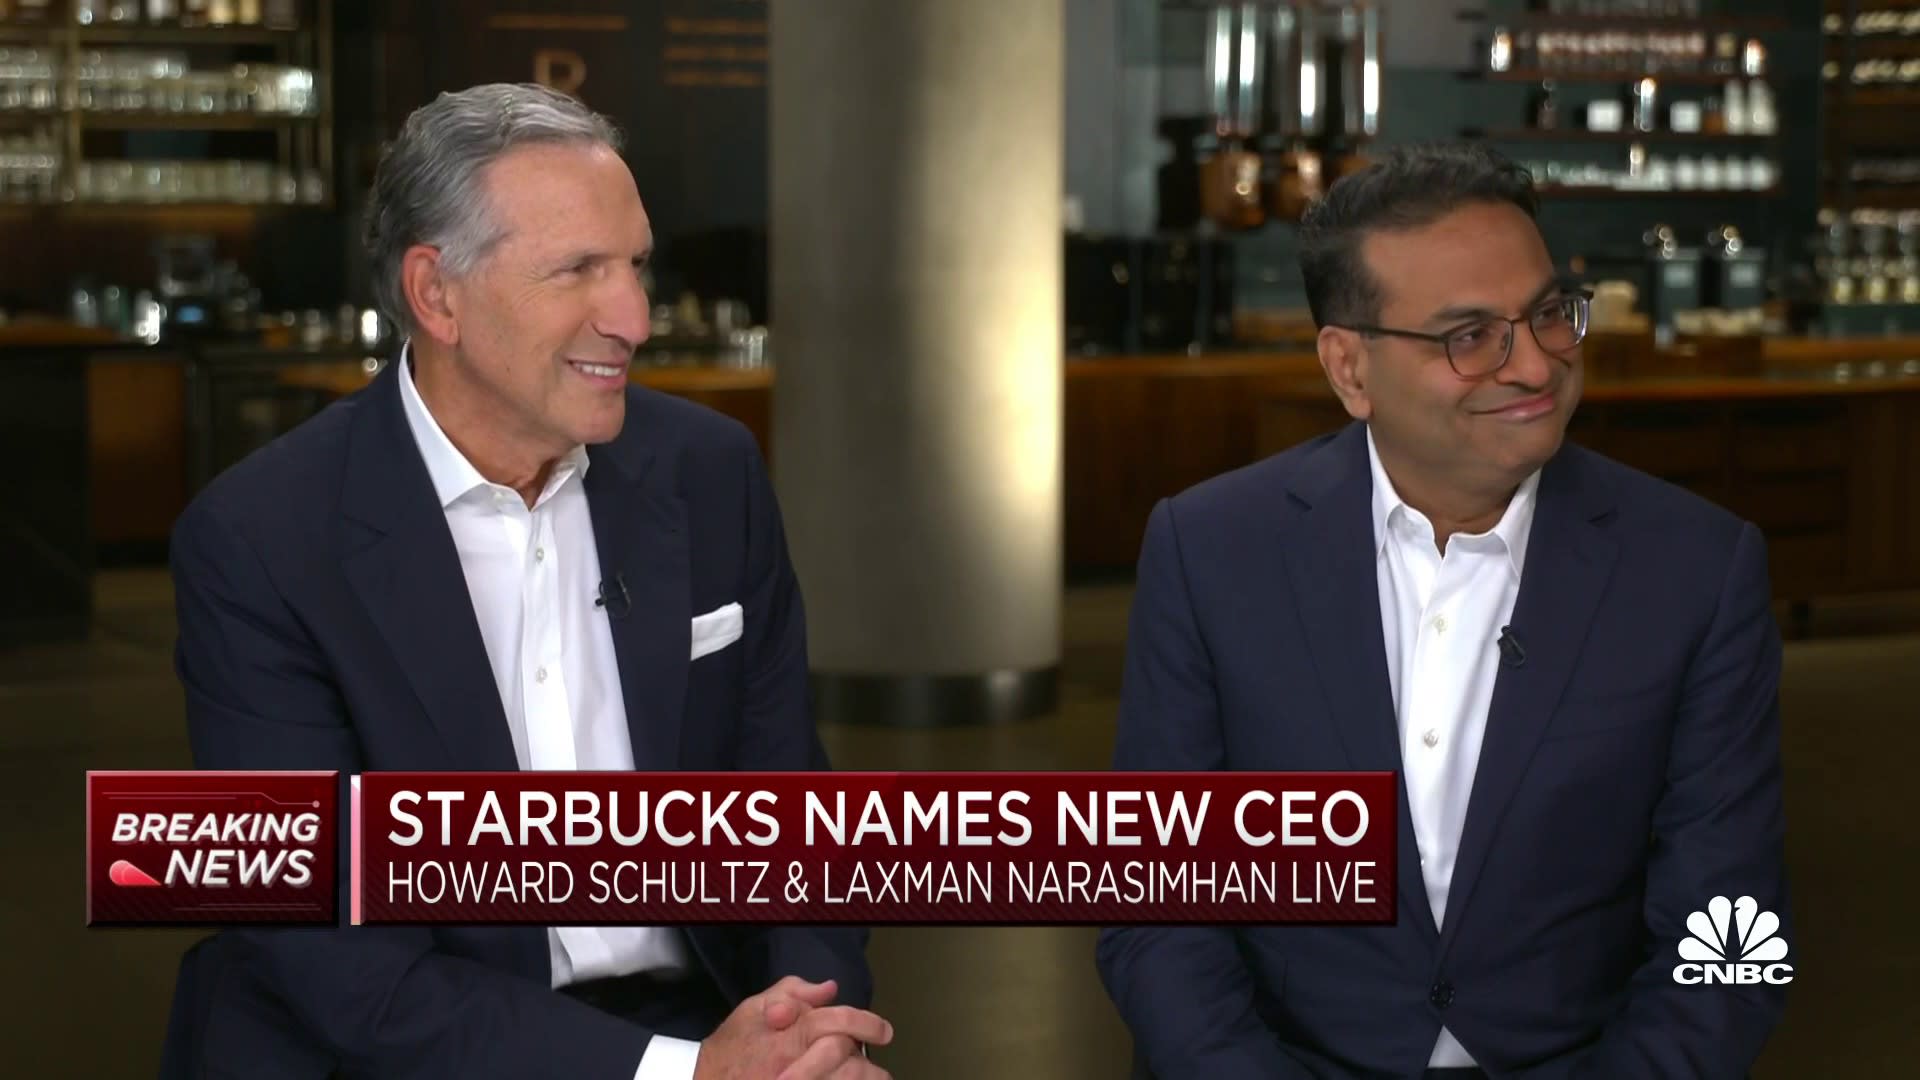 Starbucks founder Howard Schultz on new CEO: I am never coming back again, we found the right person